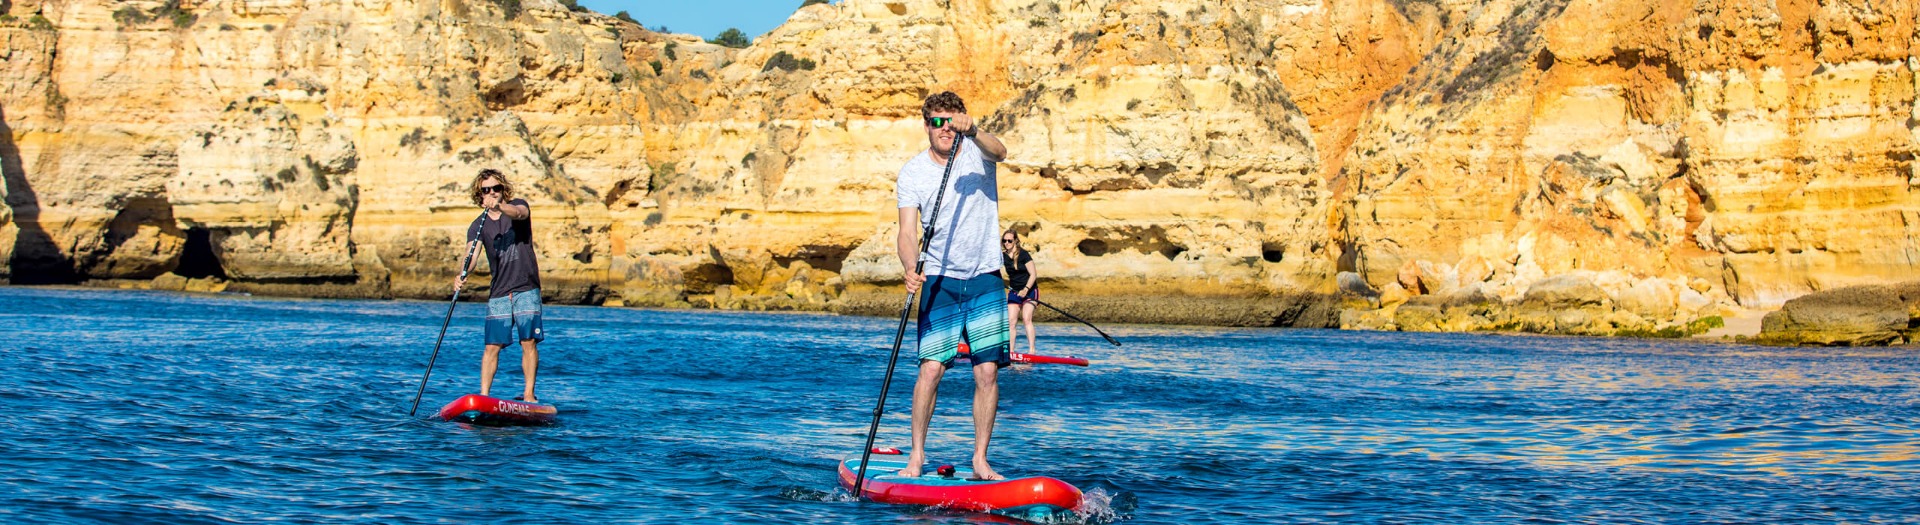 SUP Stand up Paddle Board isup aufblasbar inflatable